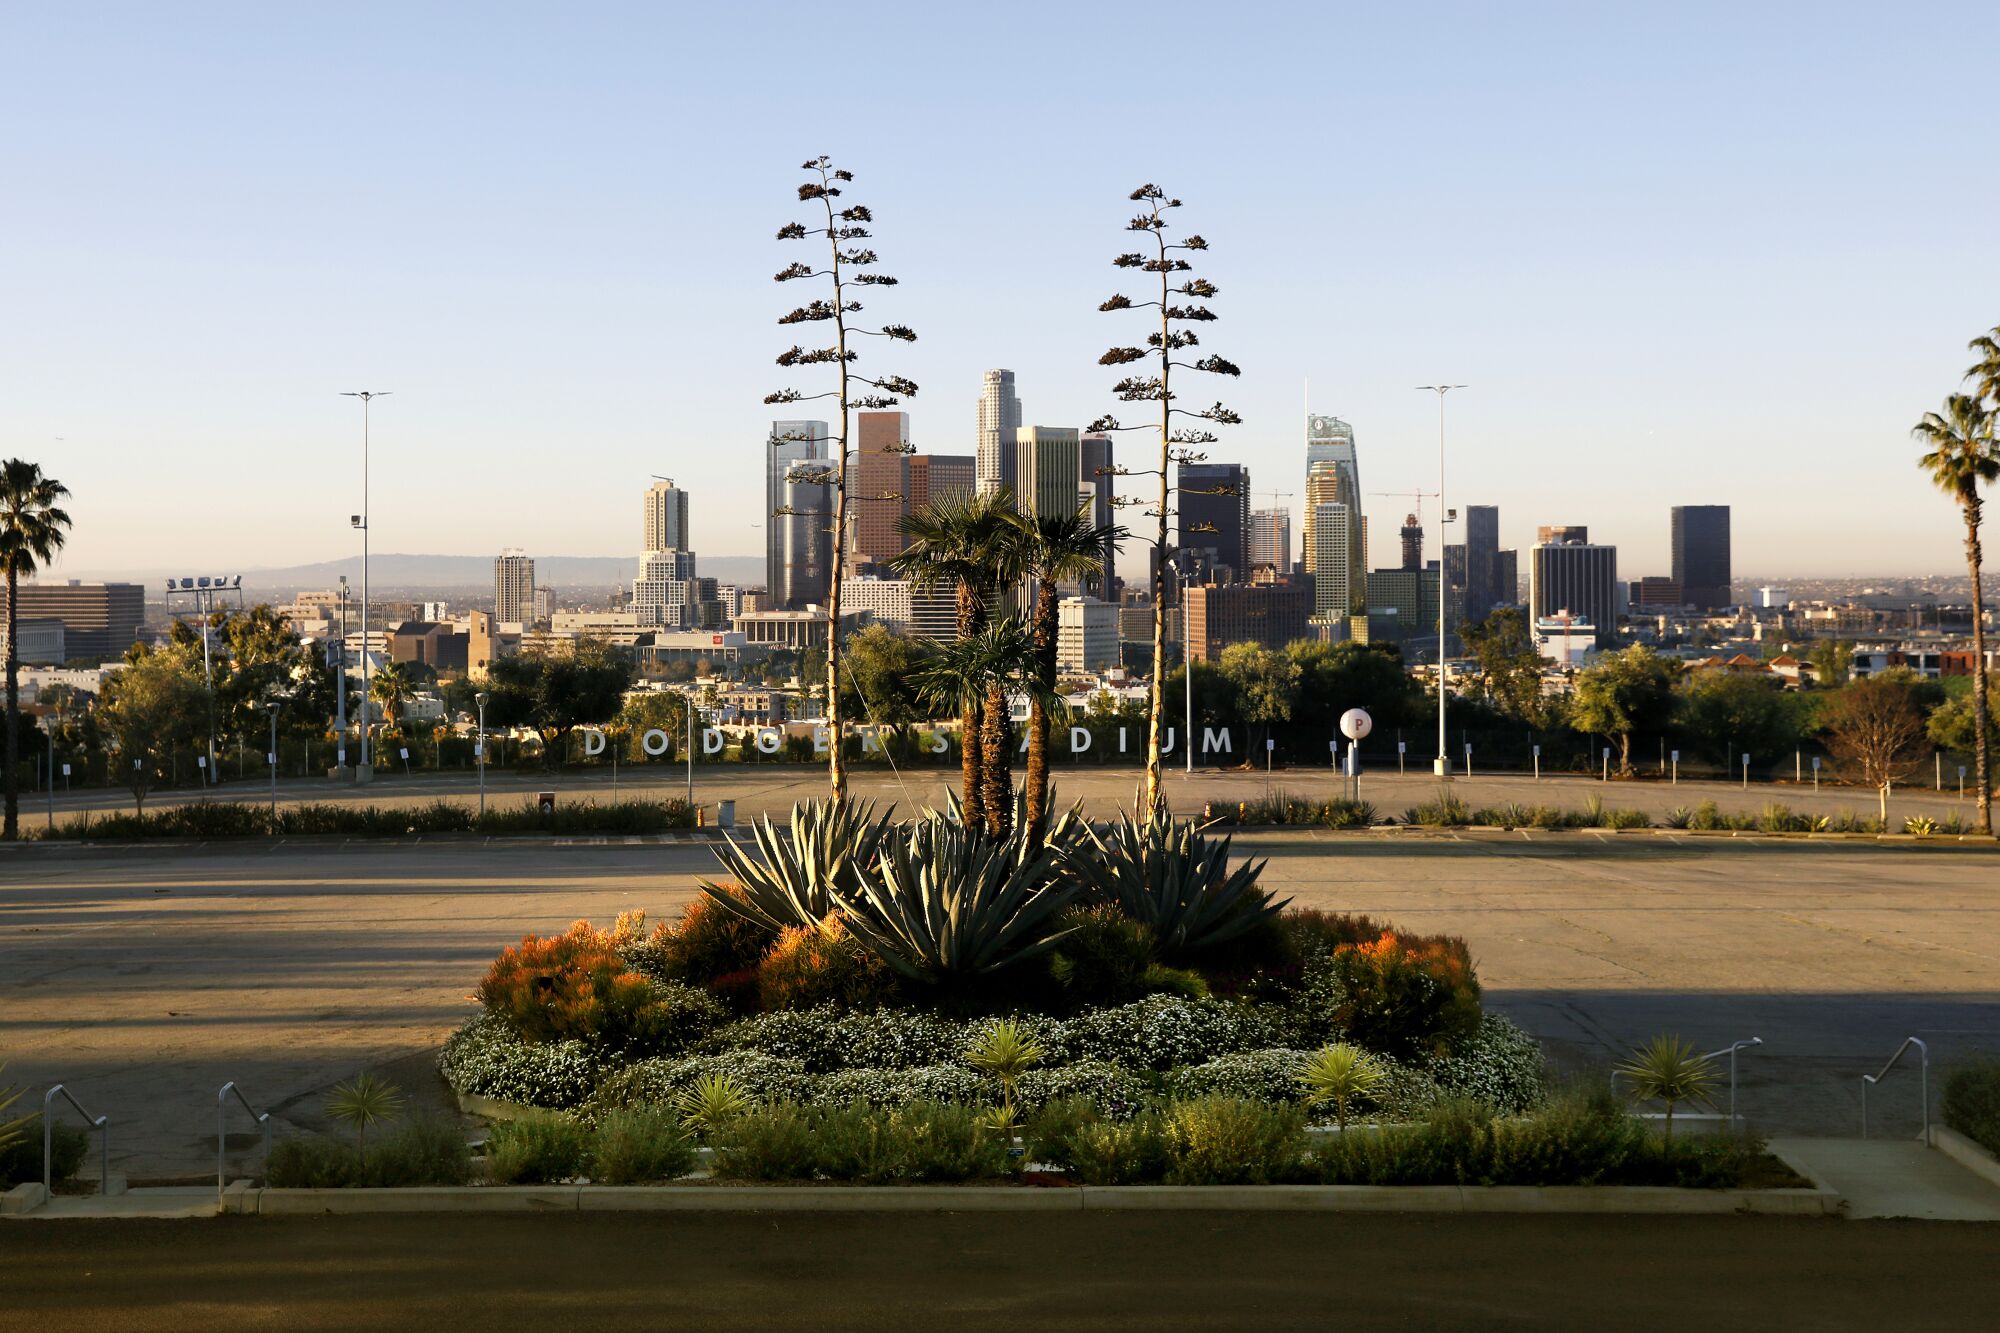 An island of colorful, drought-tolerant plants enhances the view of Downtown Los Angeles from the Top Deck of Dodger Stadium.